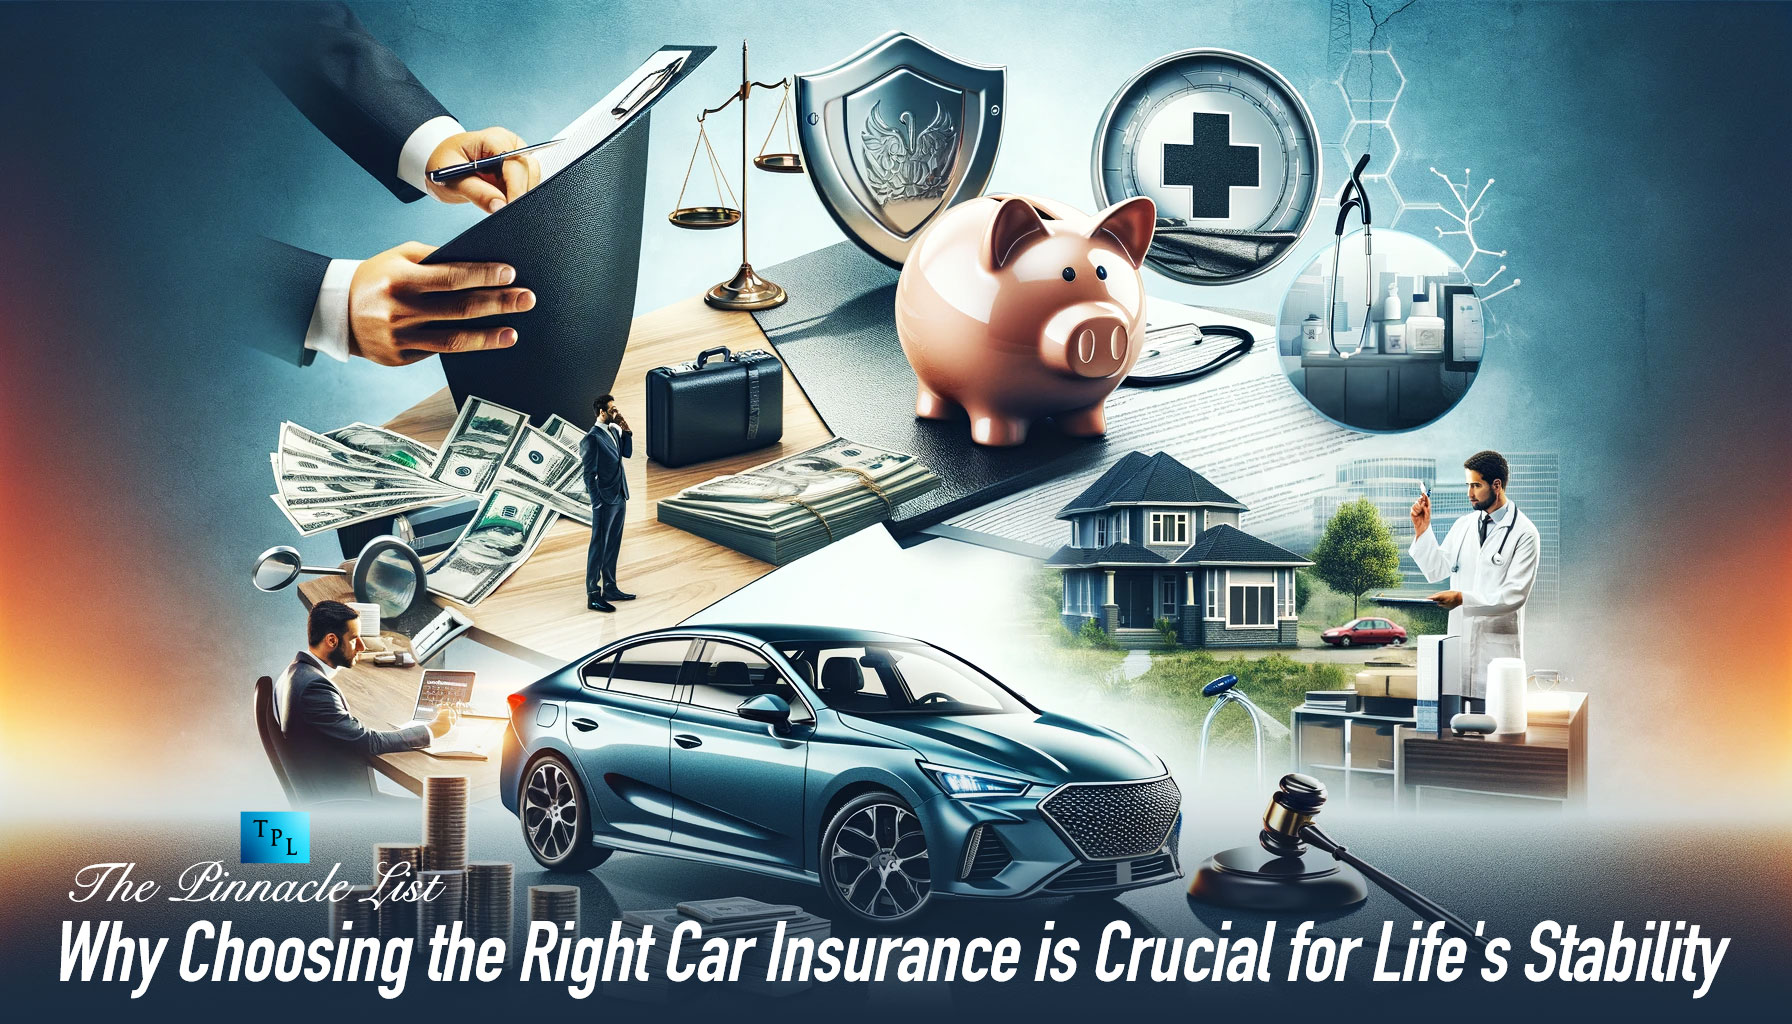 Why Choosing the Right Car Insurance is Crucial for Life's Stability